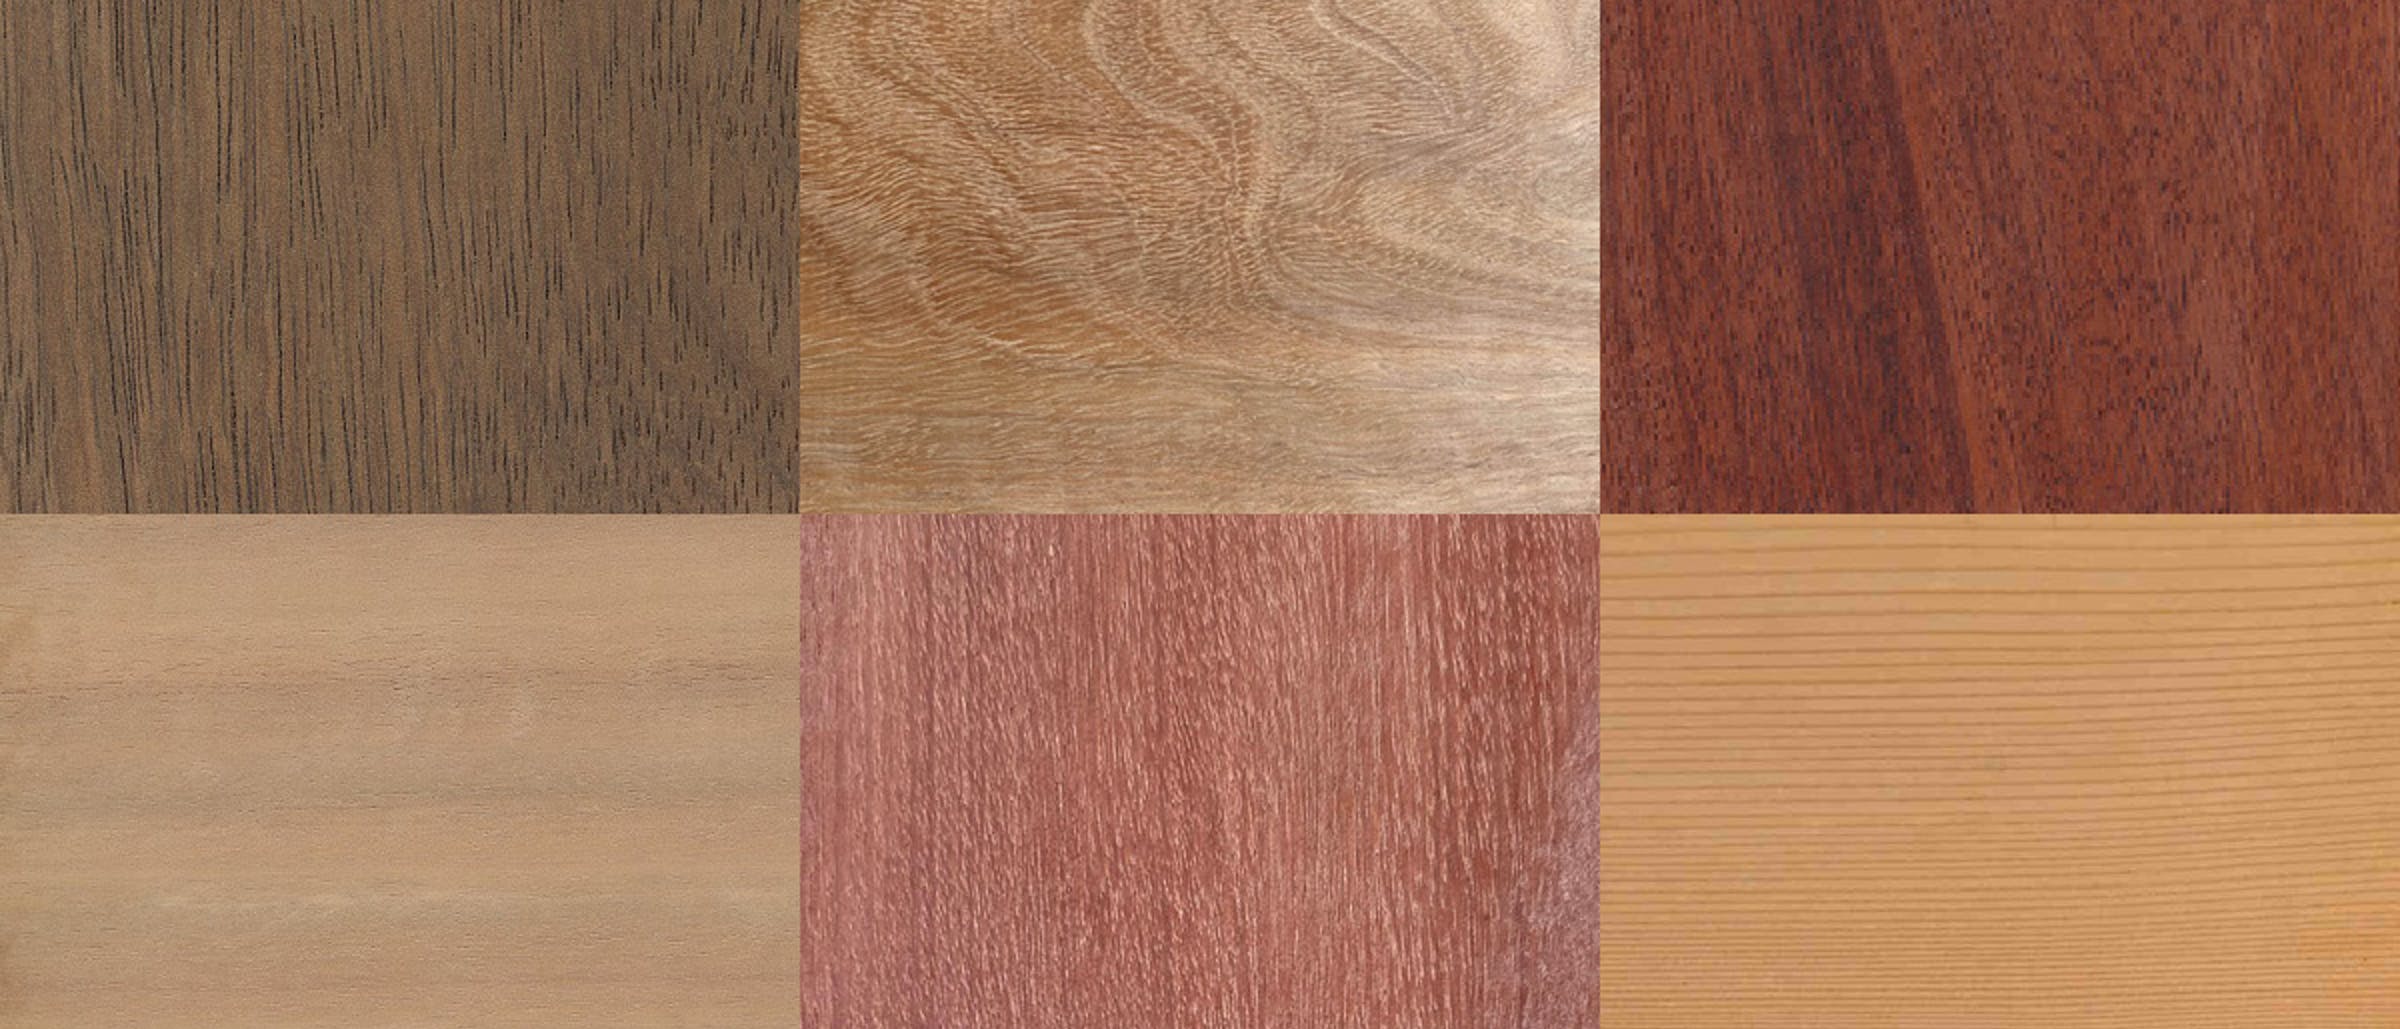 Understanding Different Types of Timber